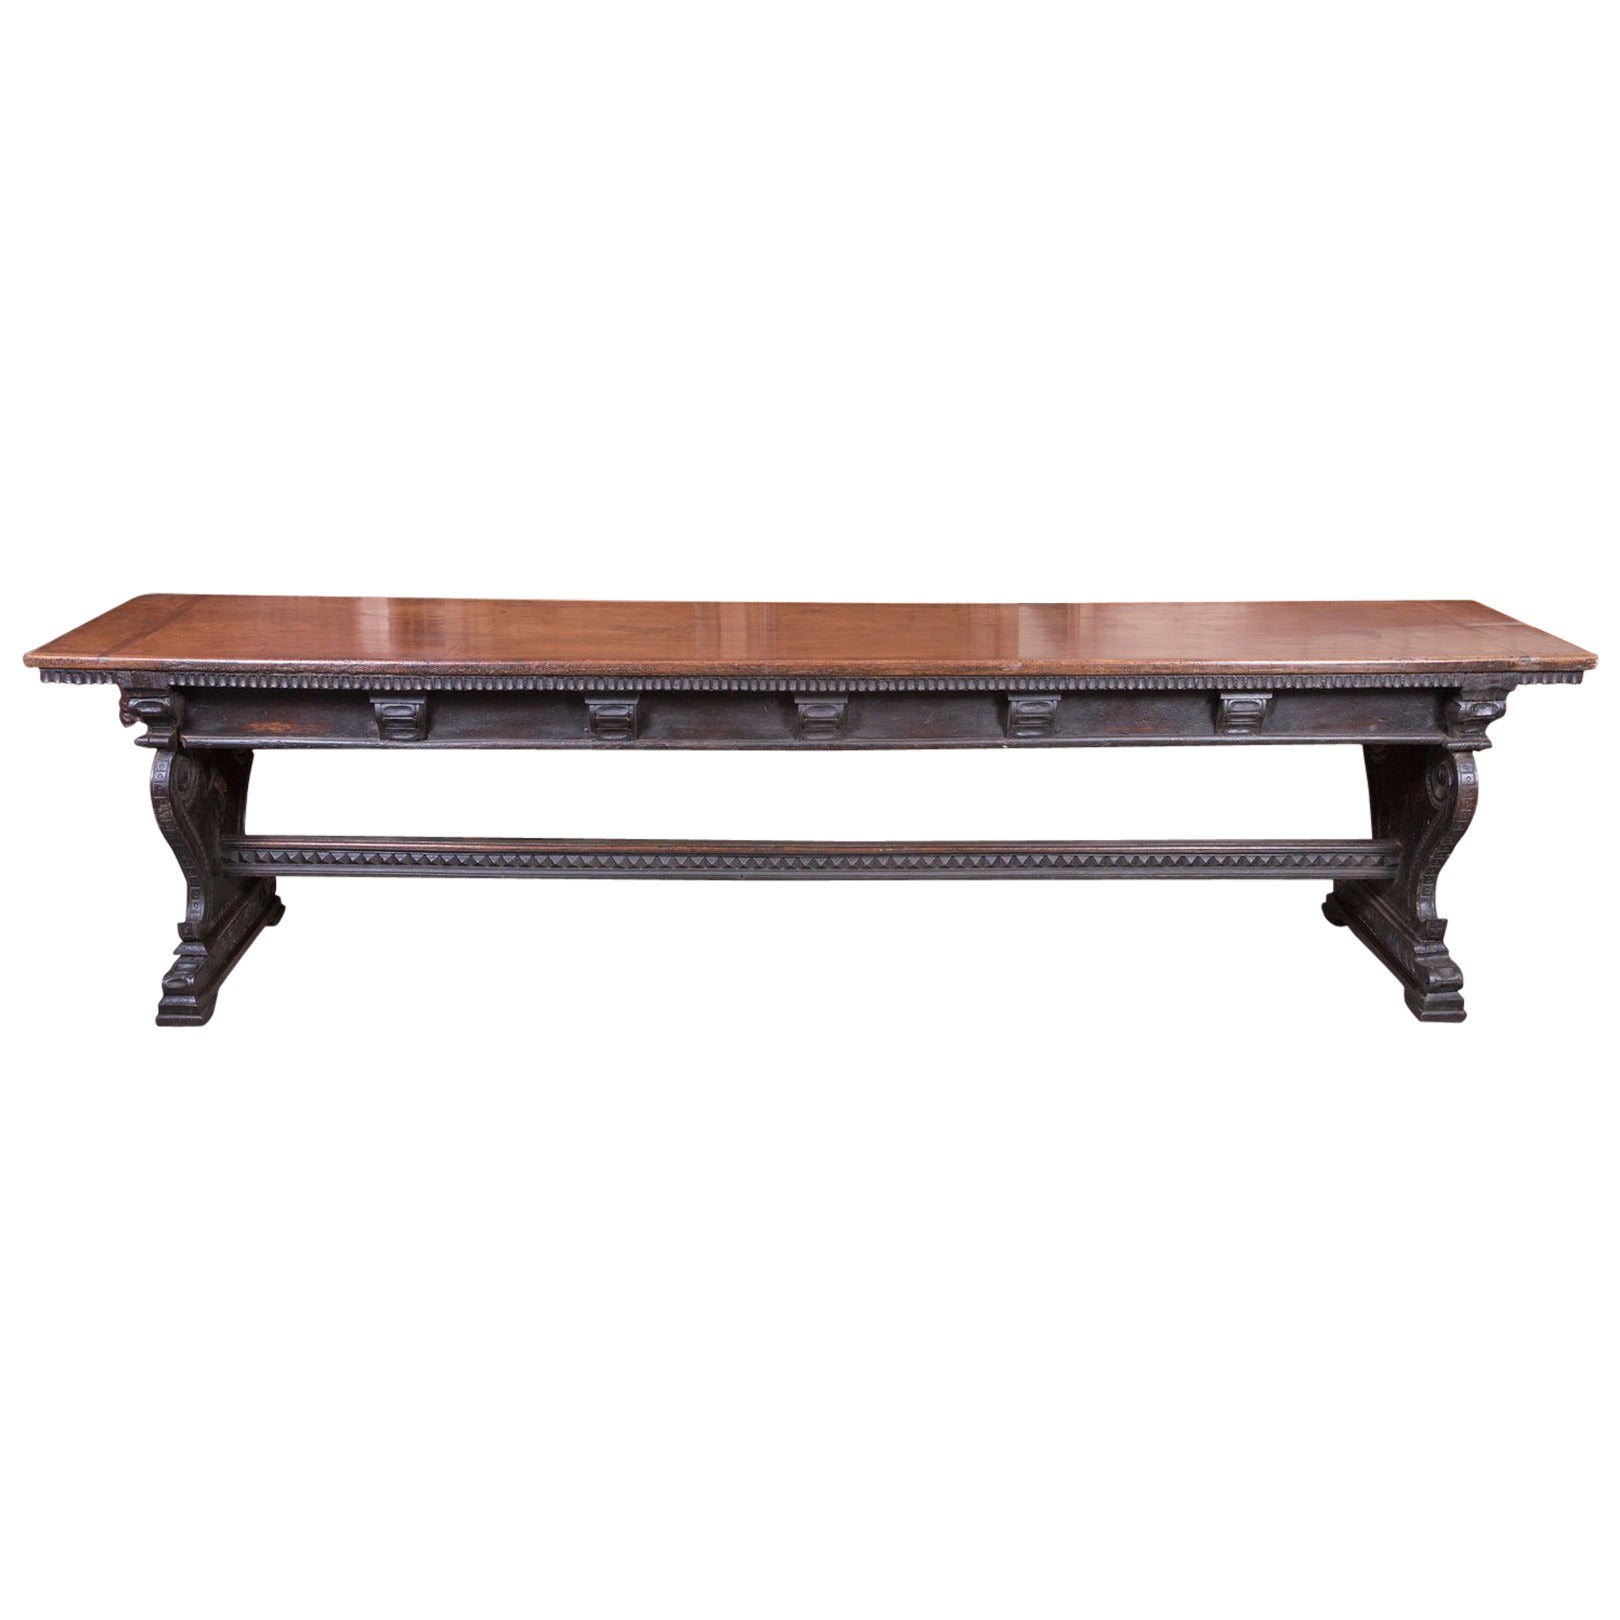 Grand 18th Century Renaissance Style Center Table or Console